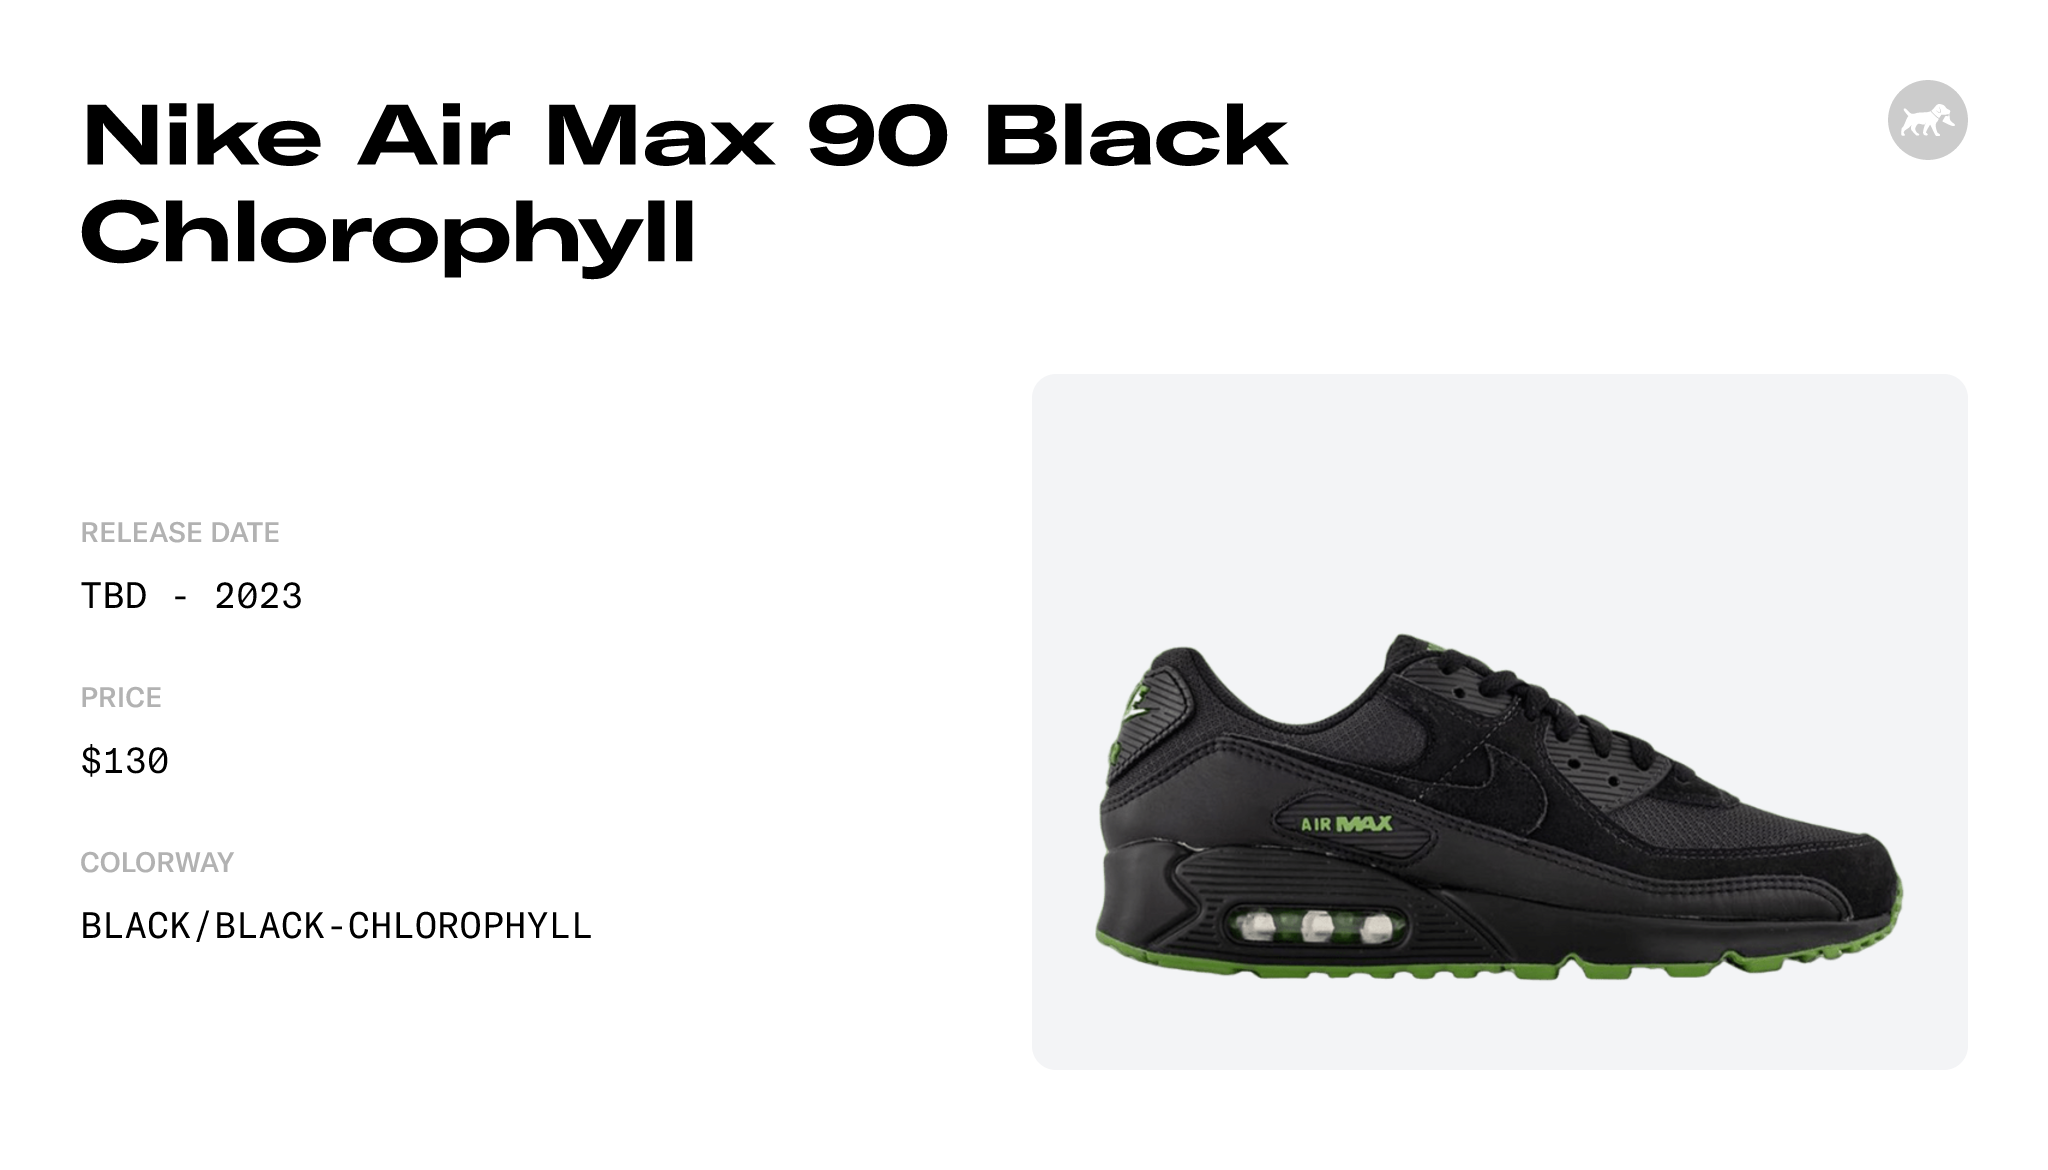 Nike Air Max 90 Black Chlorophyll - DQ4071-005 Raffles and Release Date